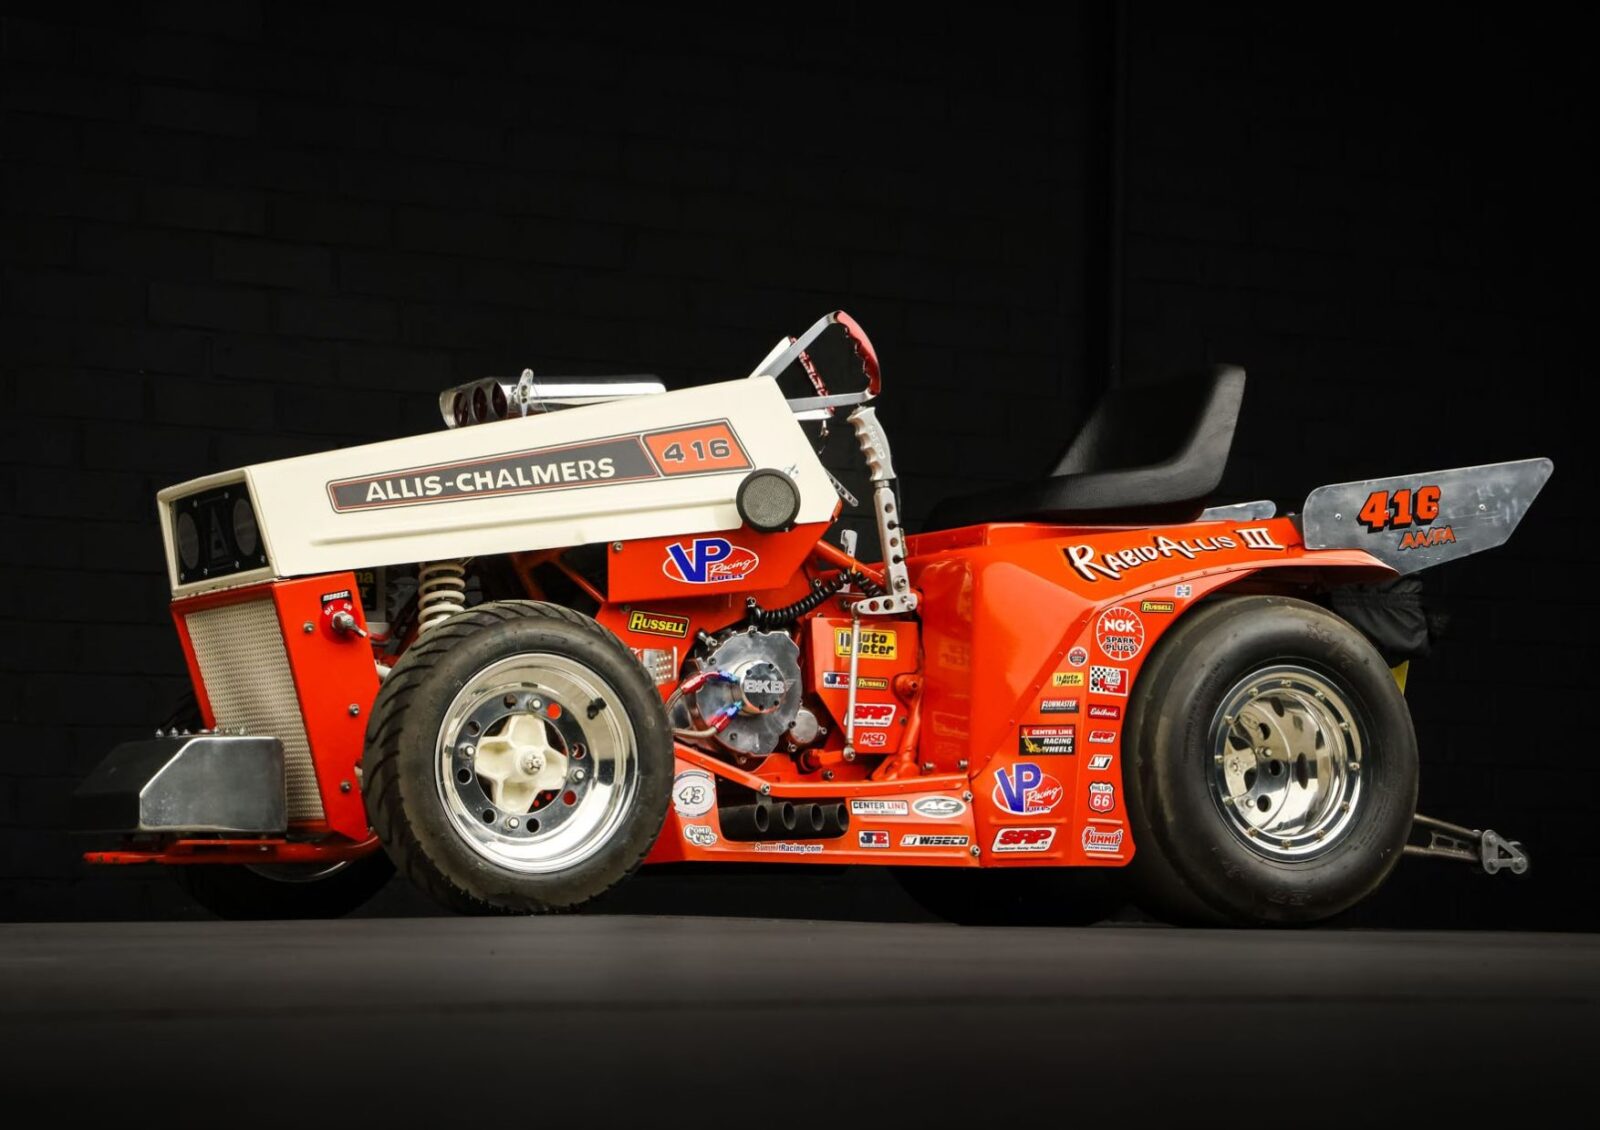 Allis-Chalmers 416 Lawn Tractor Dragster